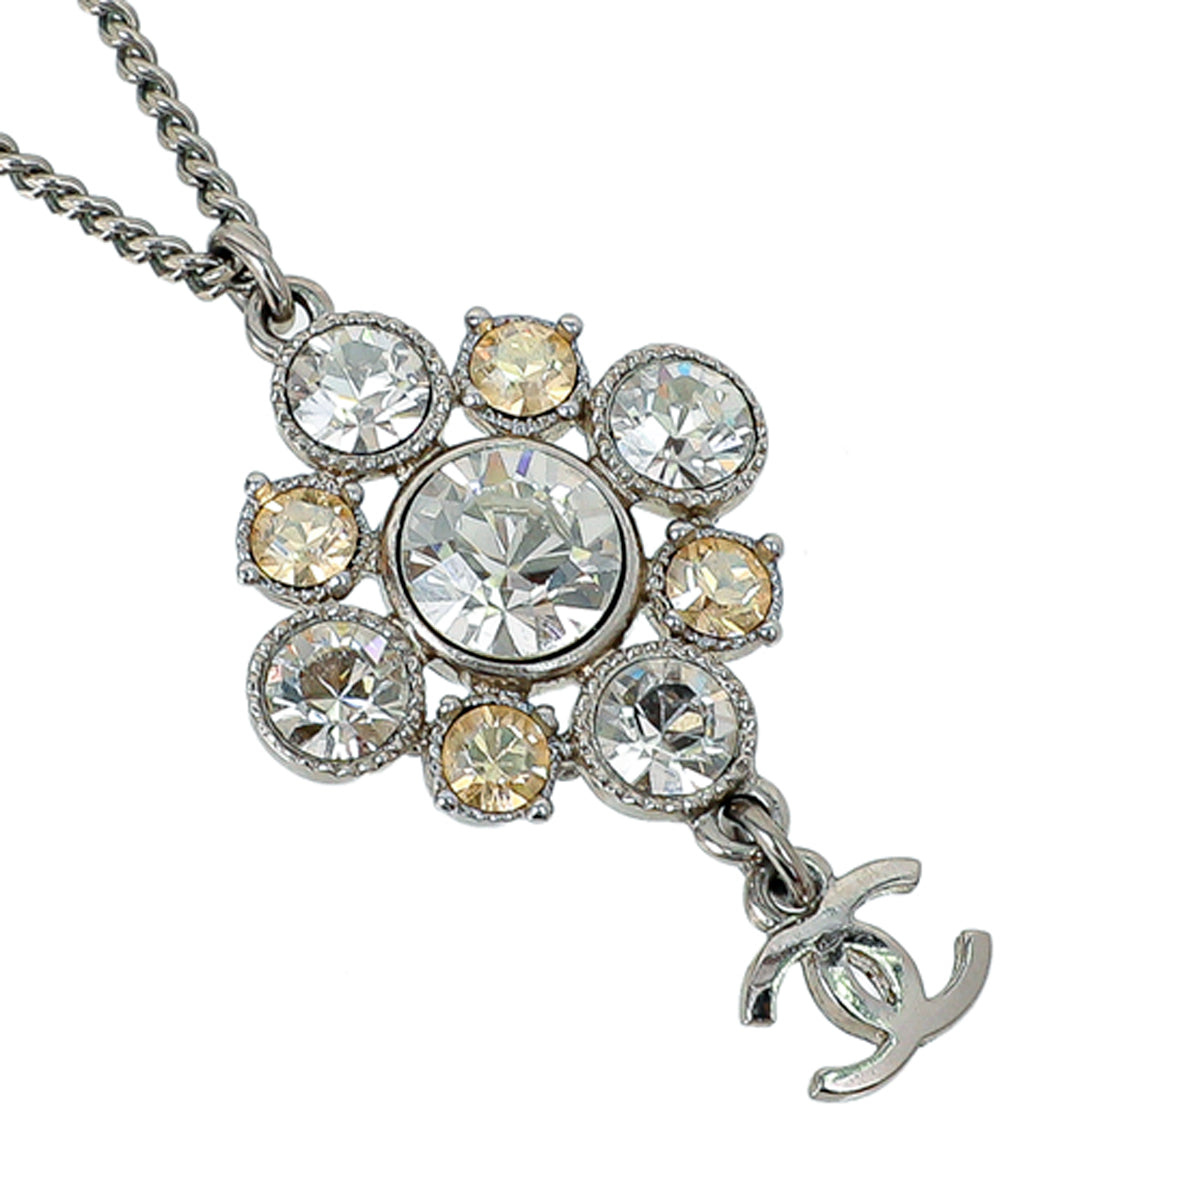 Chanel Silver CC Cluster Crystal Pendant Necklace